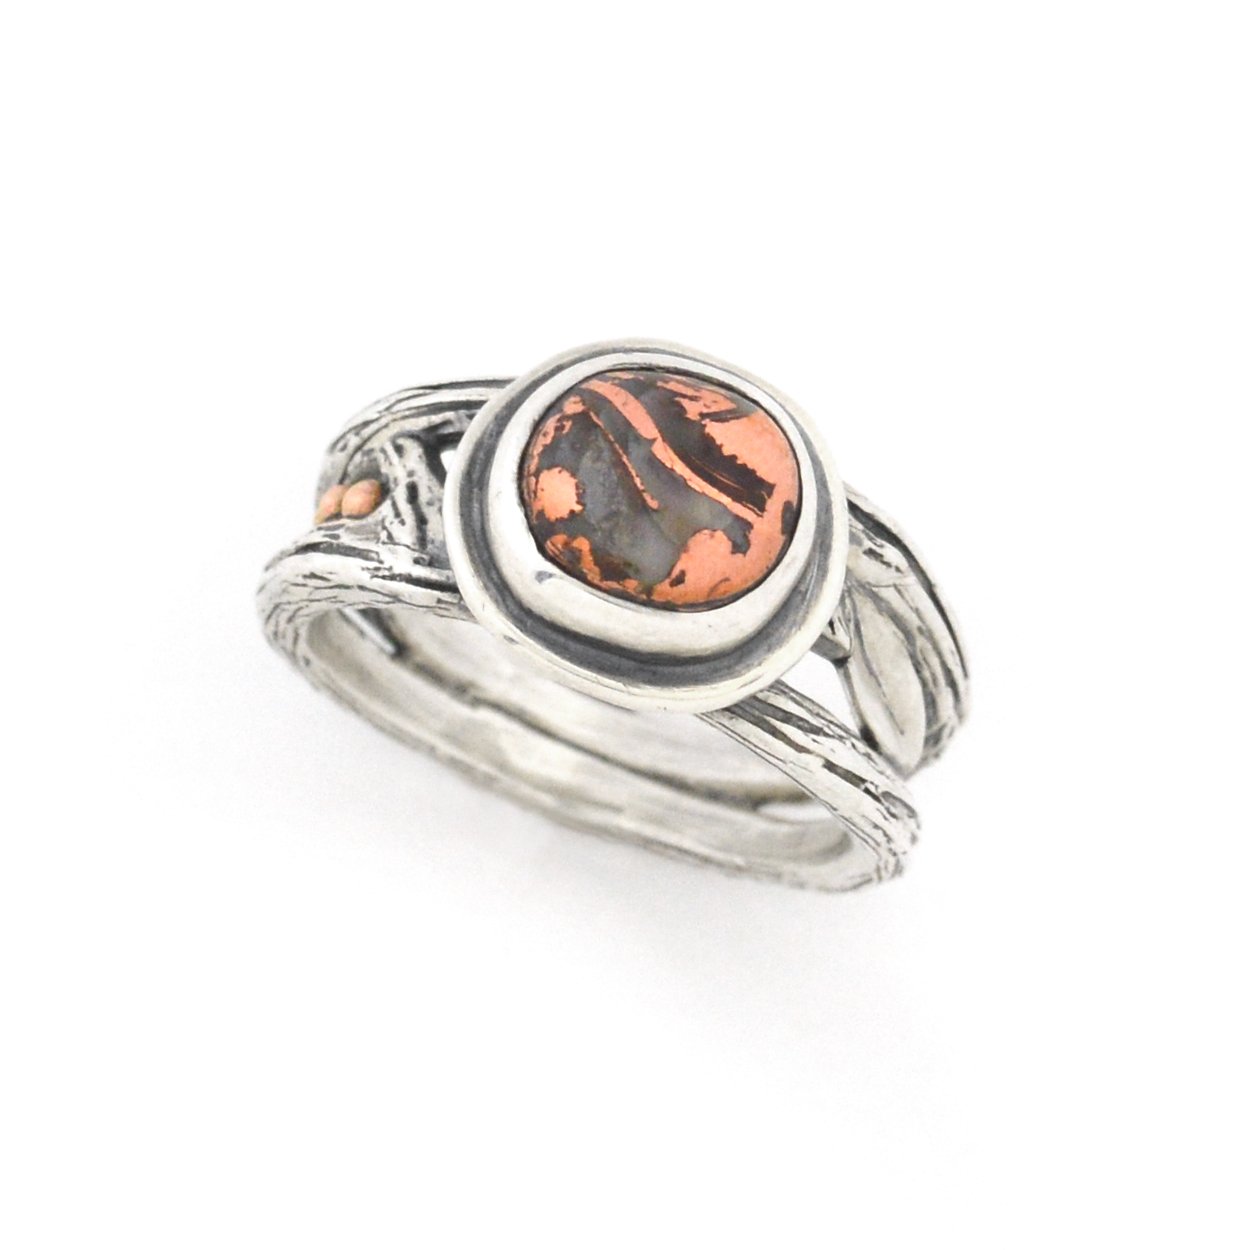 Copper Agate Autumn Twig Ring - Choose Your Own Stone - Ring  A. 9mm / Lake Superior Copper Agate  B. 8mm / Lake Superior Copper Agate 3721 - handmade by Beth Millner Jewelry